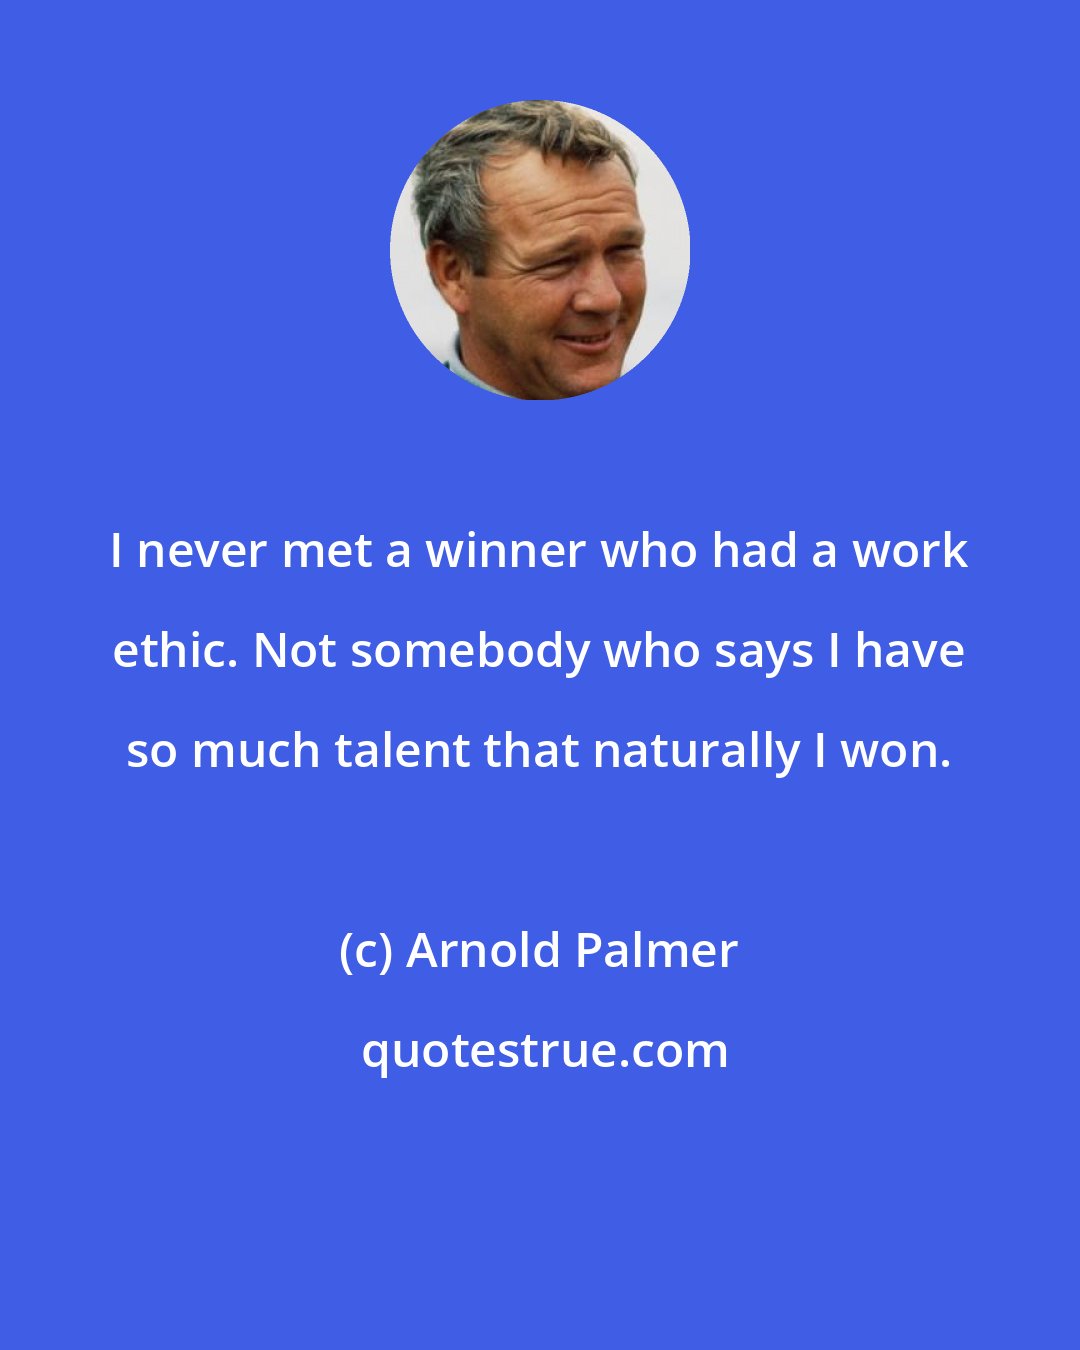 Arnold Palmer: I never met a winner who had a work ethic. Not somebody who says I have so much talent that naturally I won.